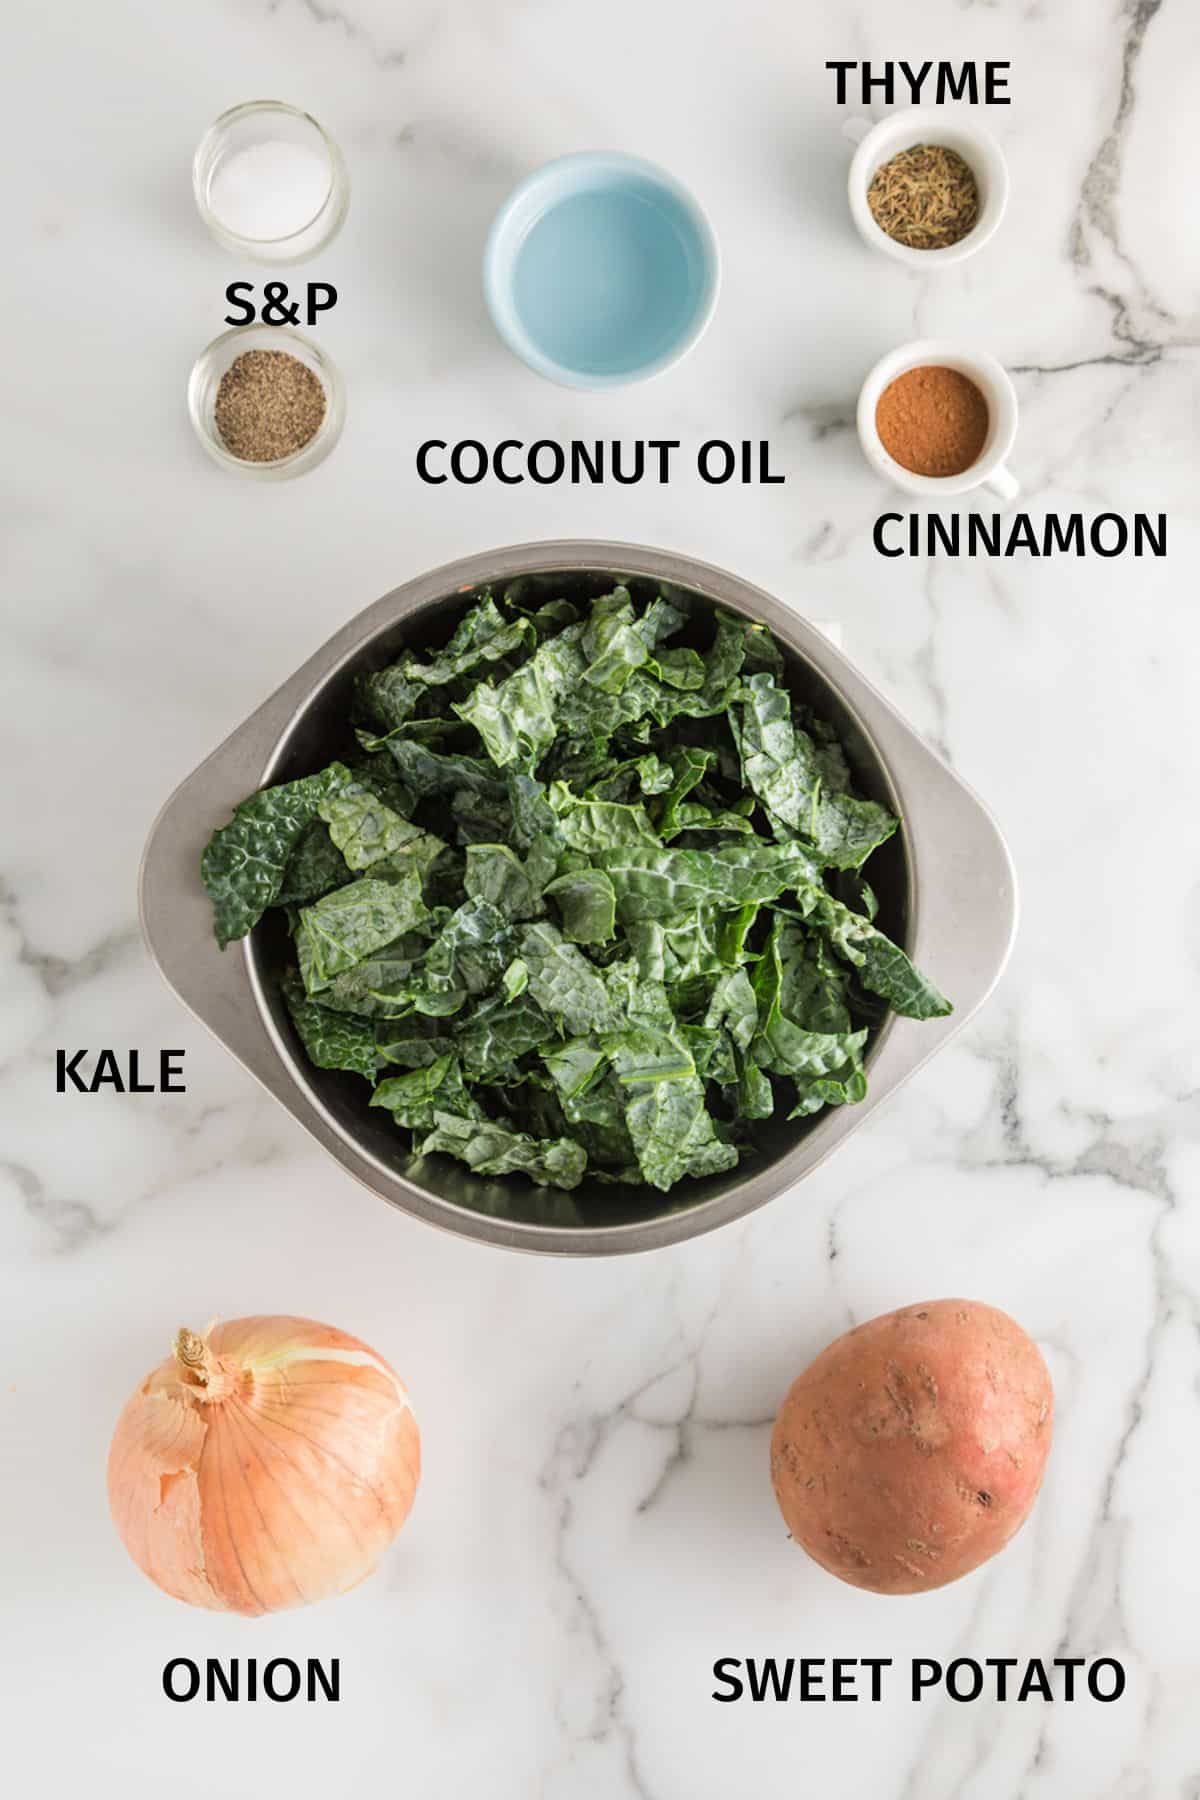 Ingredients for baked kale and sweet potato in small bowls.